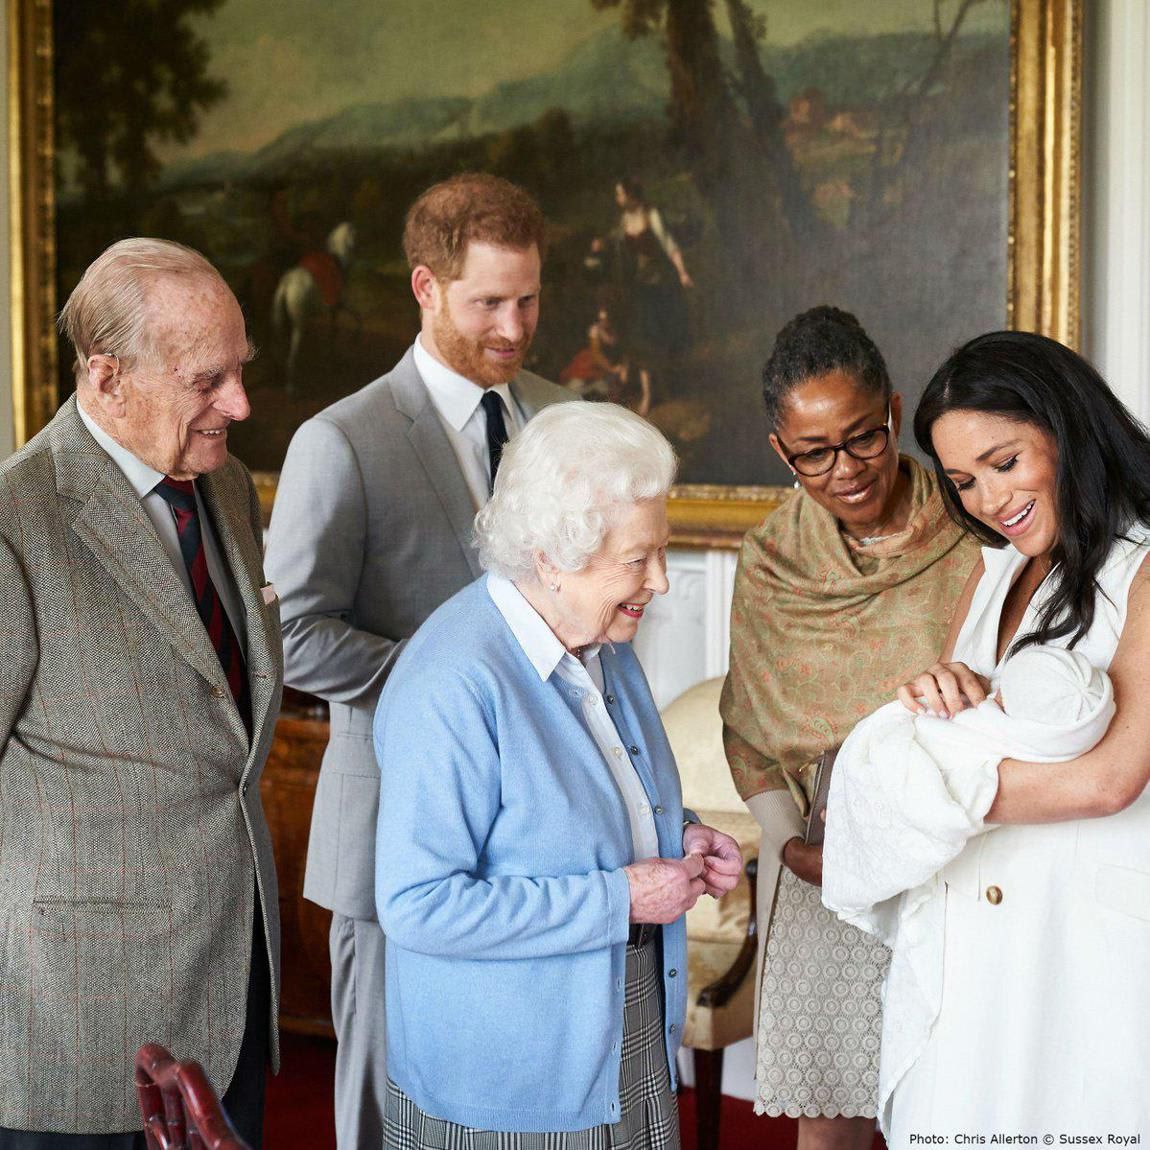 Archie won't celebrate his first Christmas with his great grandmother Queen Elizabeth